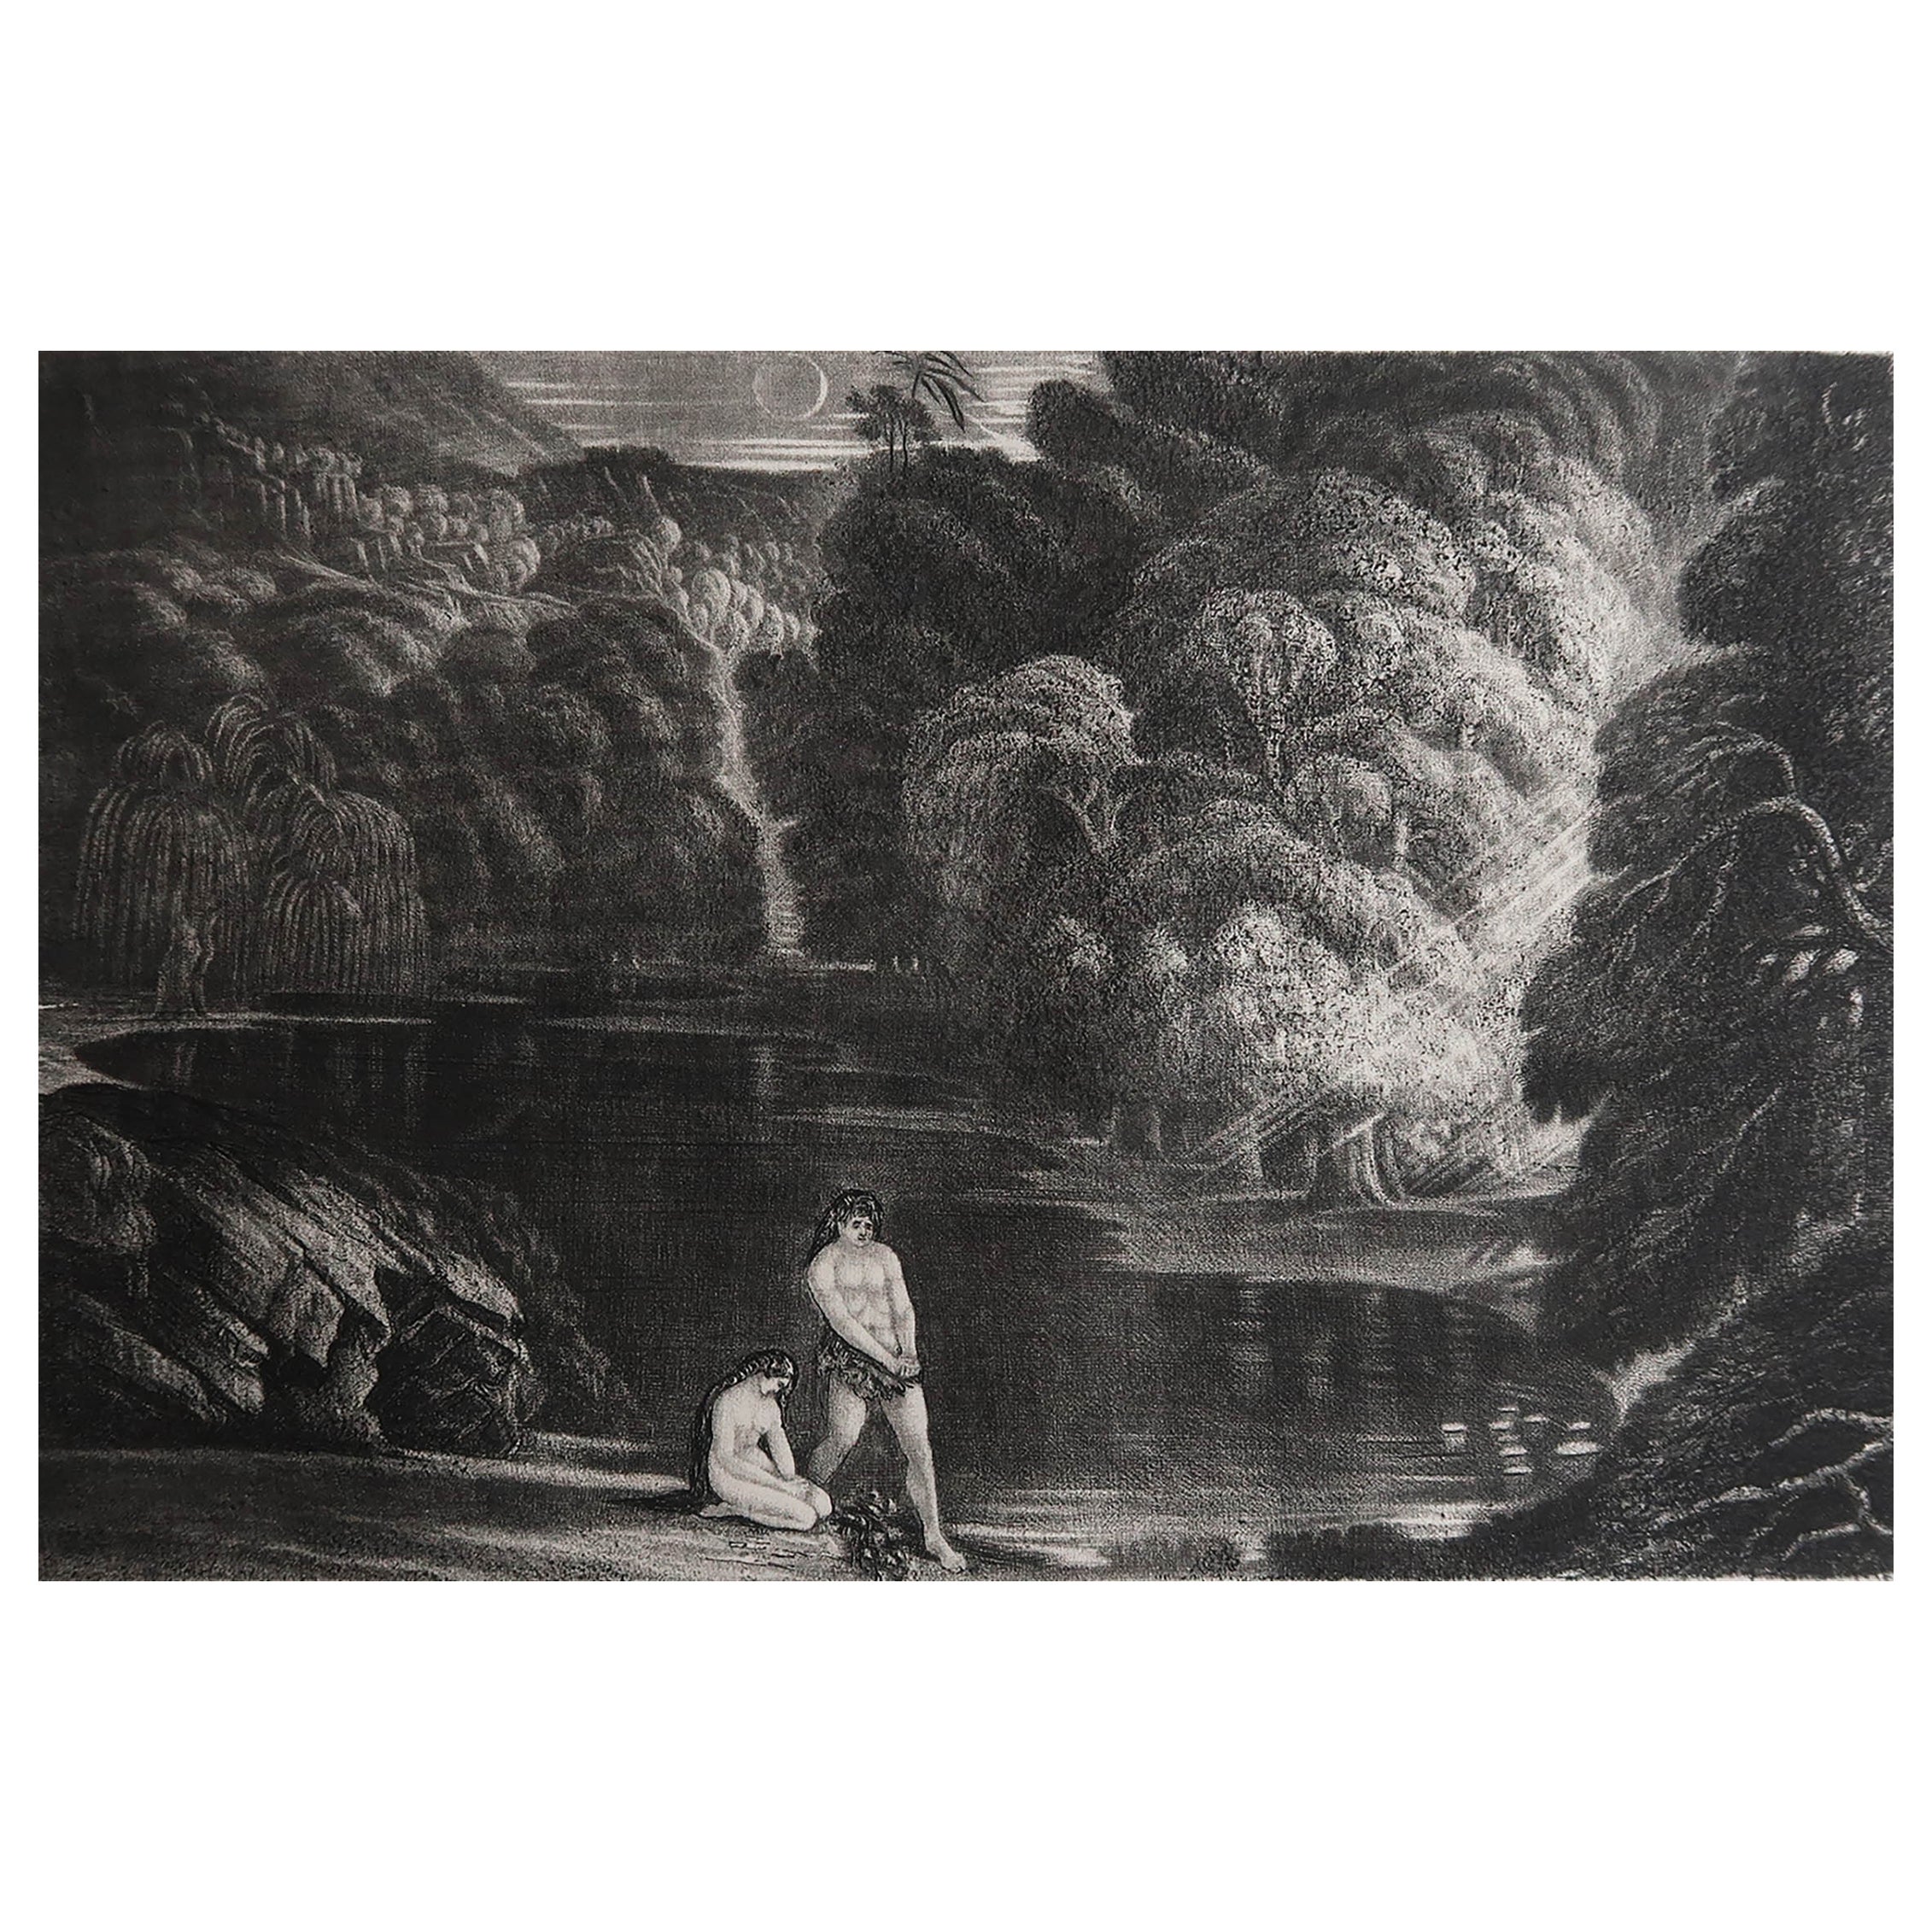 Mezzotint by John Martin, the Judgment of the Almighty, Sangster, circa 1850